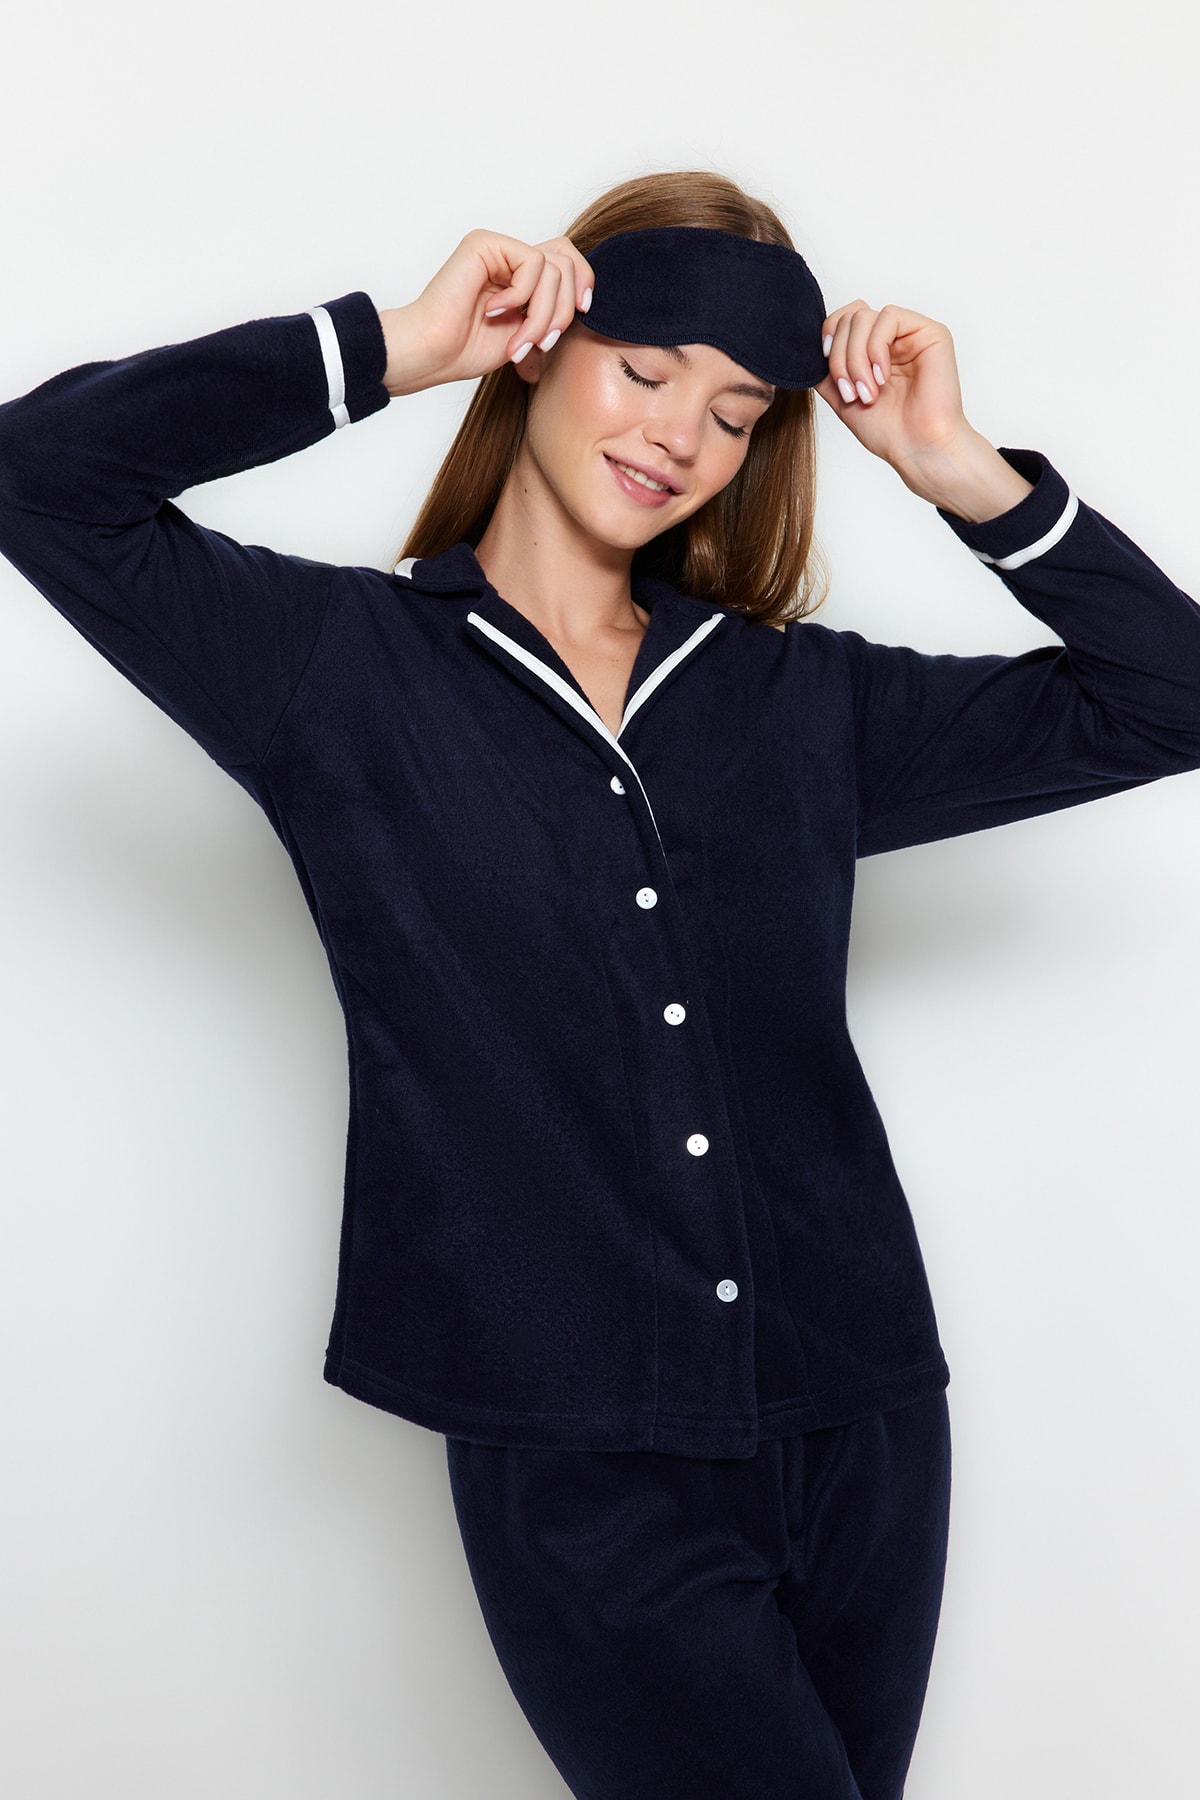 Trendyol Navy Blue Pie Detailed Sleeping Band, Thick Knitted Pajamas Set